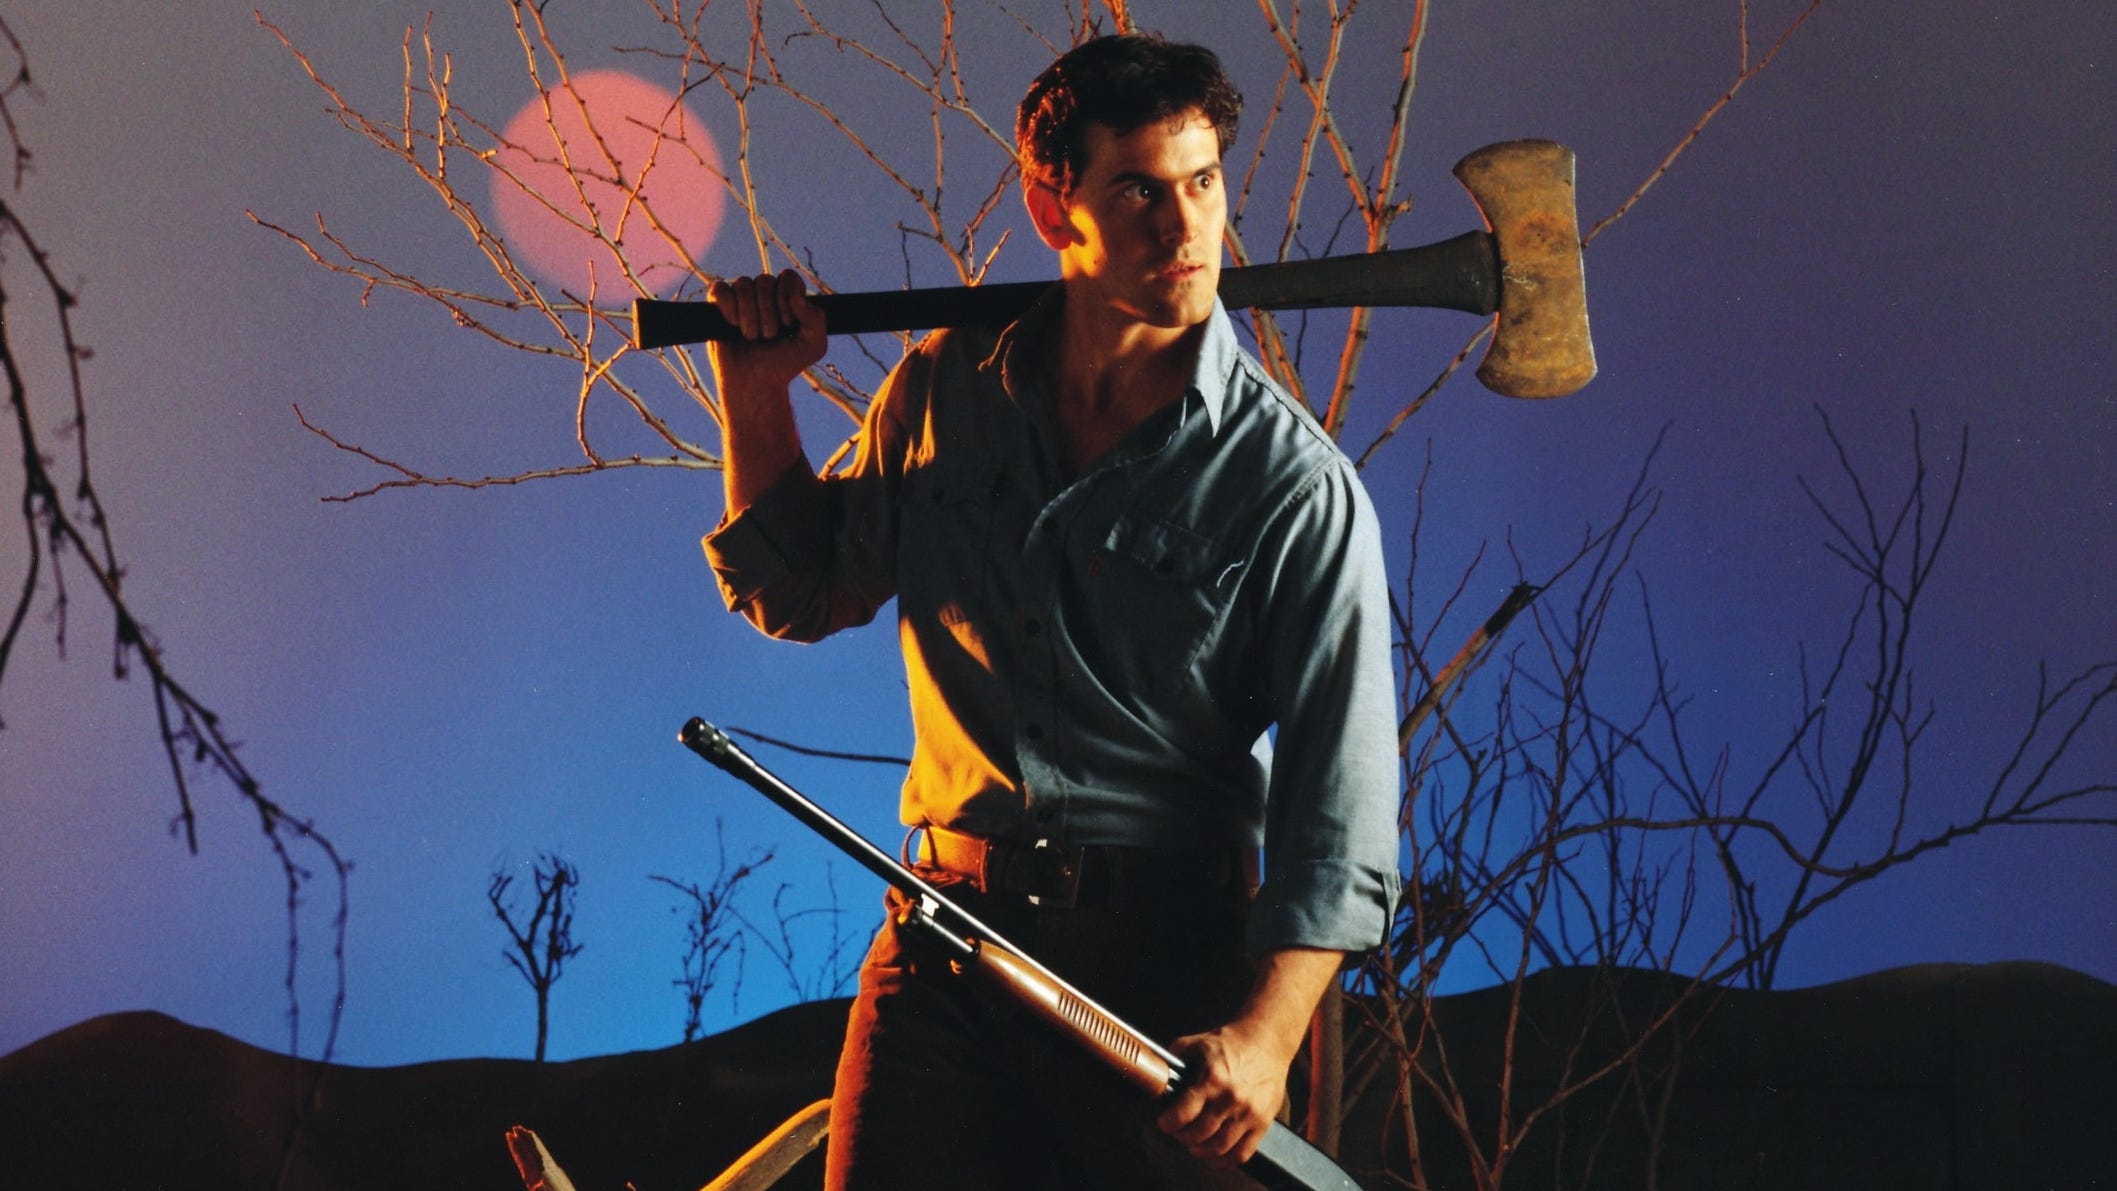 5 Reasons Why: The Evil Dead Remake is Better Than the Original